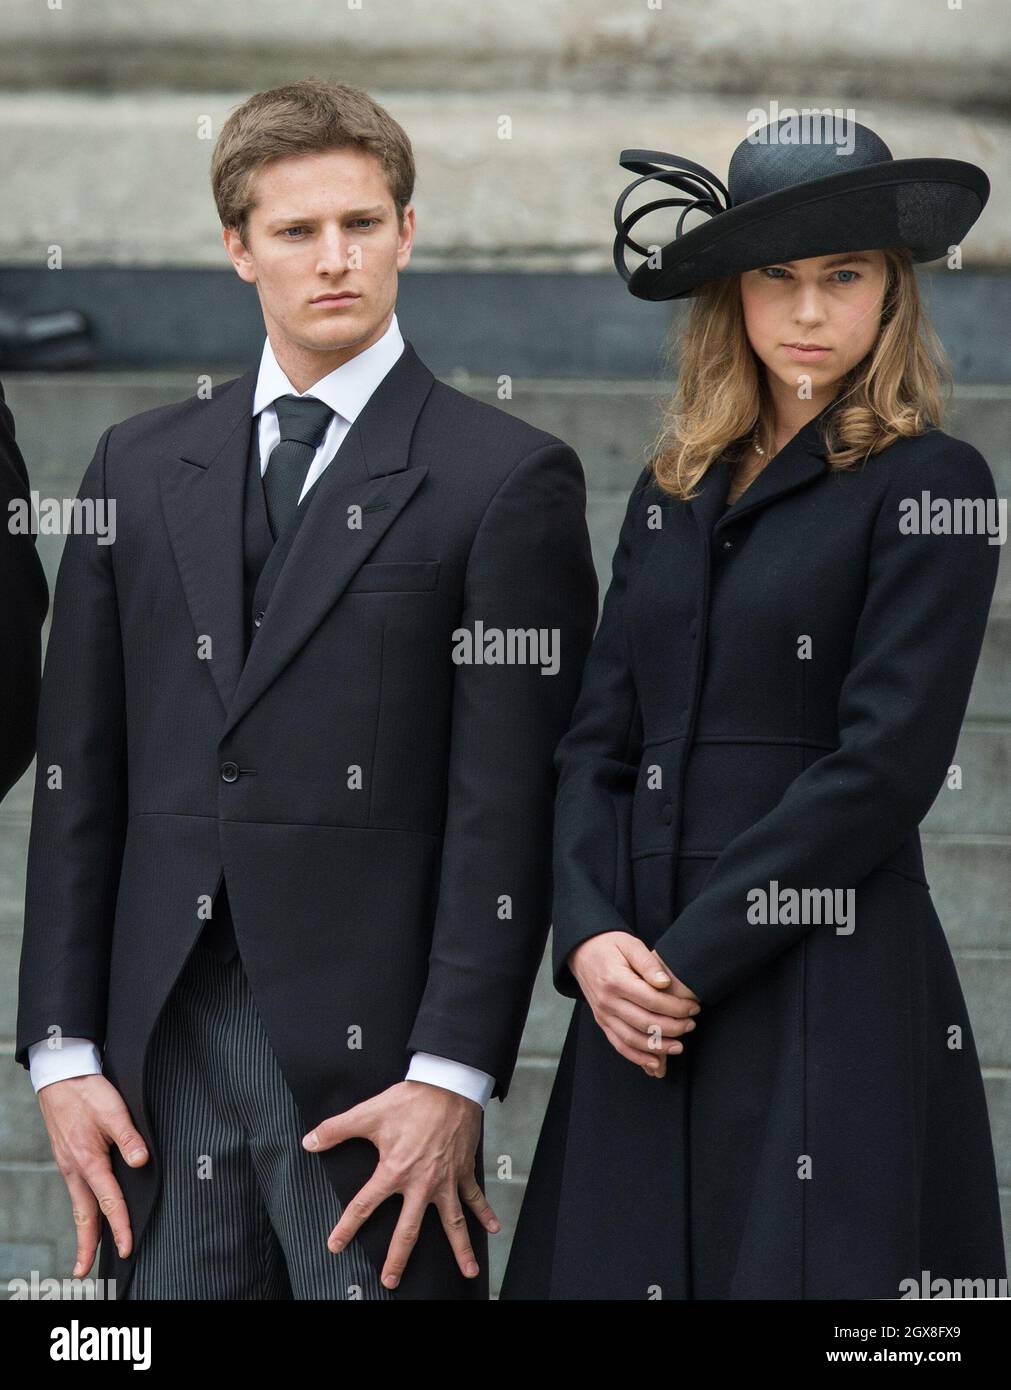 Michael Thatcher and Amanda Thatcher leave St. Paul's Cathedral following the funeral of their grandmother Margaret Thatcher on April 17, 2013. Stock Photo